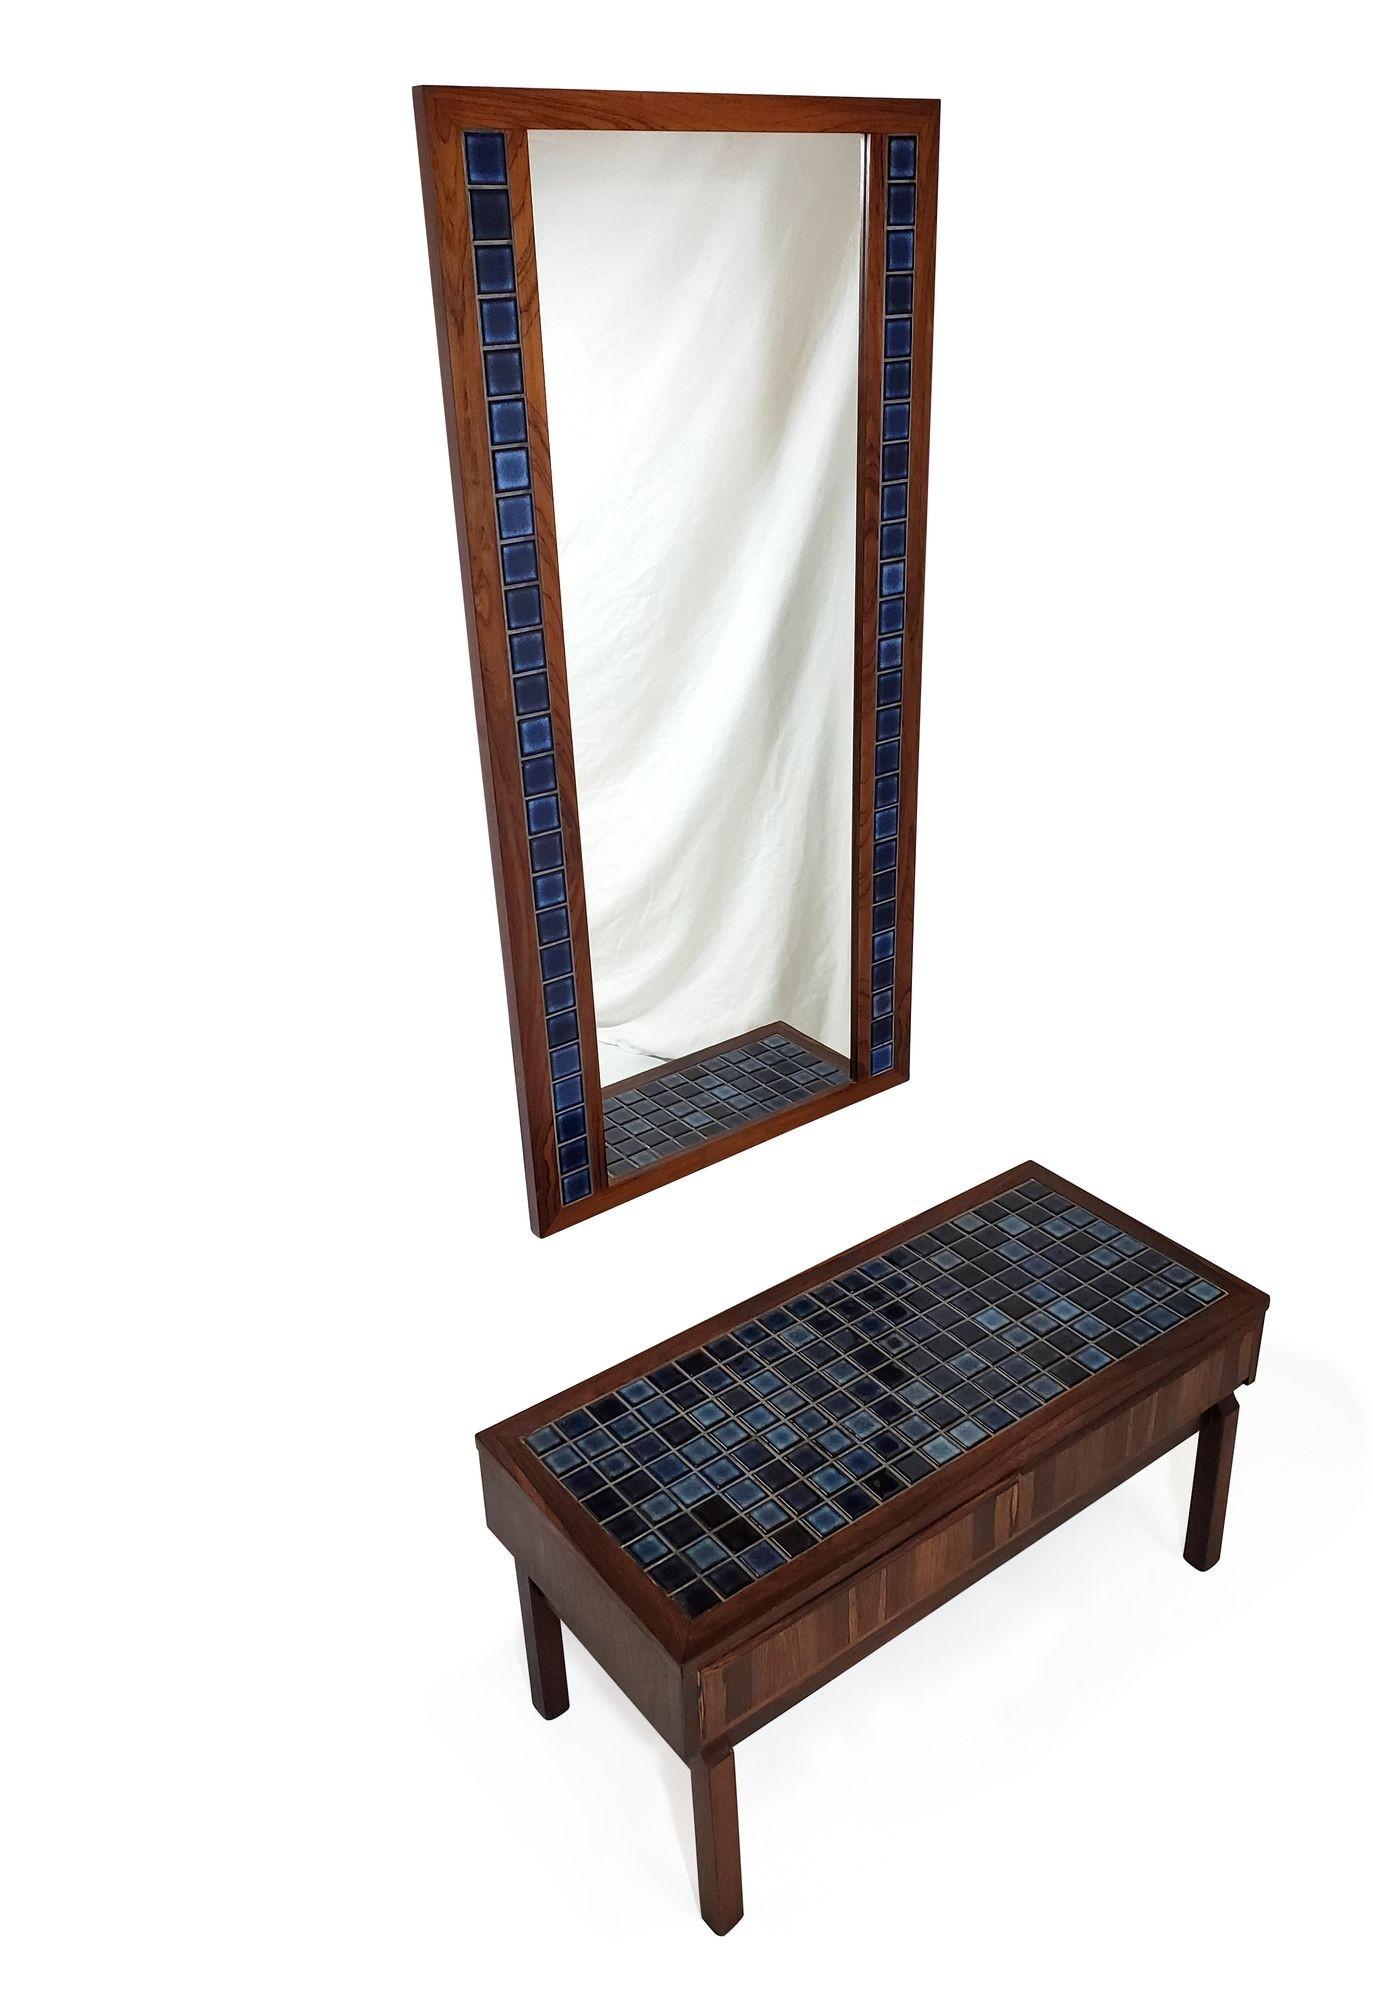 Rosewood and Blue Tile Entry Cabinet and Mirror 2